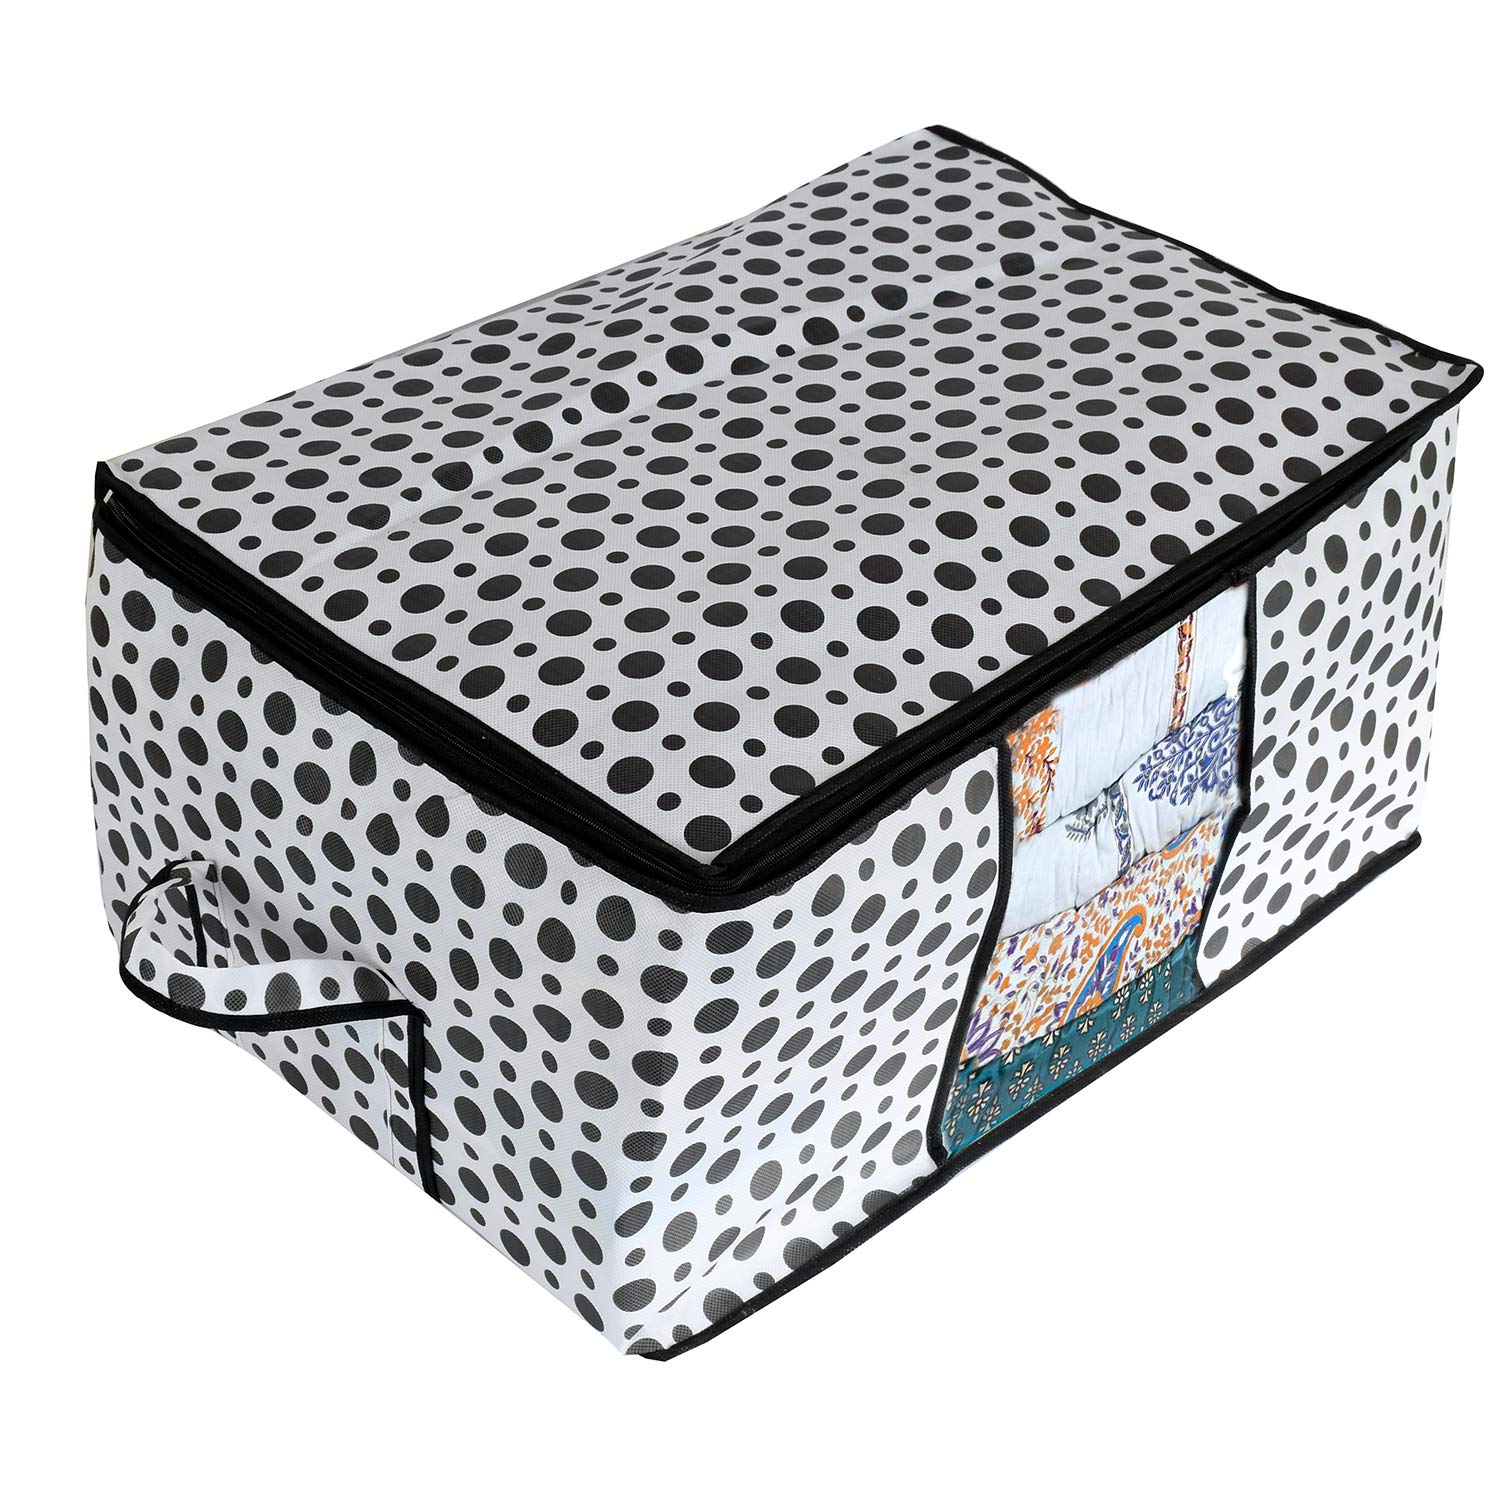 Kuber Industries Polka Dots Design Non Woven Underbed Storage Bag, Cloth Organiser, Blanket Cover with Transparent Window (Black & White) -CTKTC38100